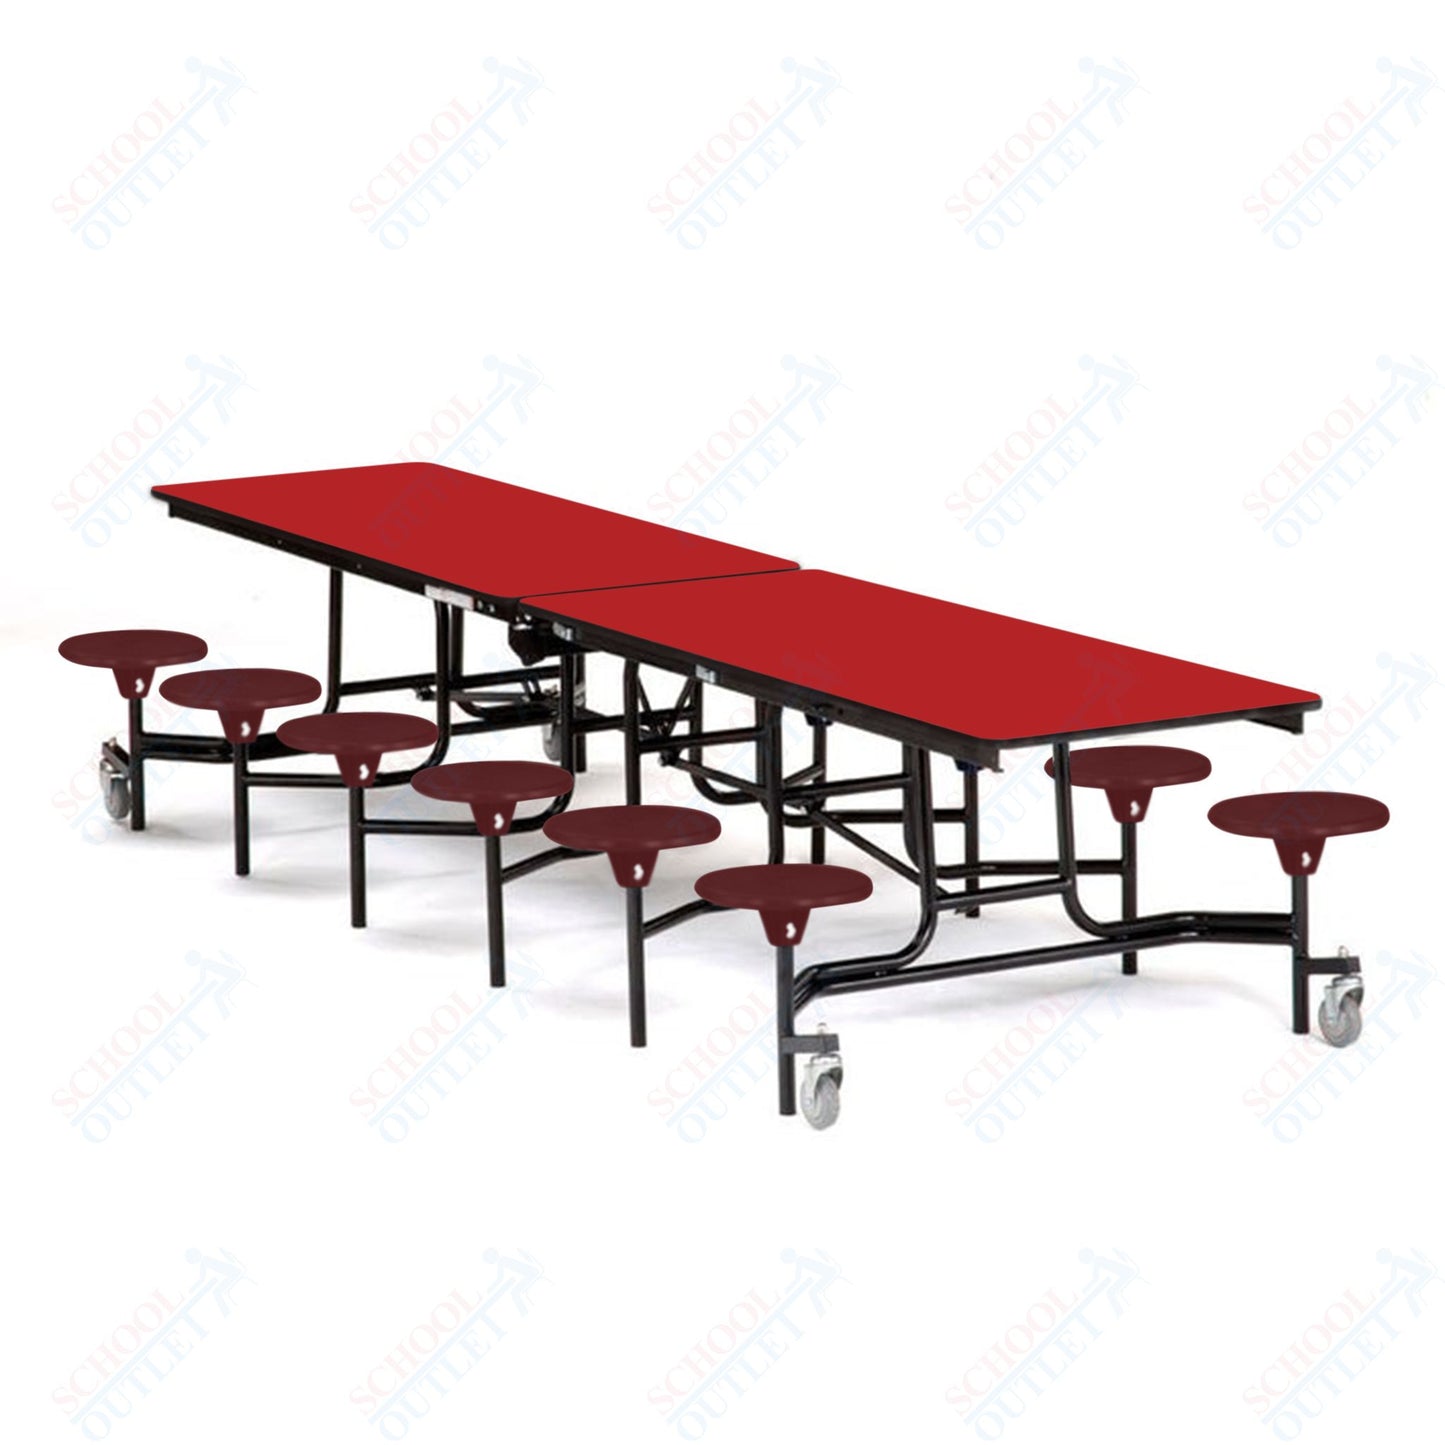 Mobile Cafeteria Lunchroom Stool Table - 30" W x 12' L - 12 Stools - Particleboard Core - T-Molding Edge - Chrome Frame